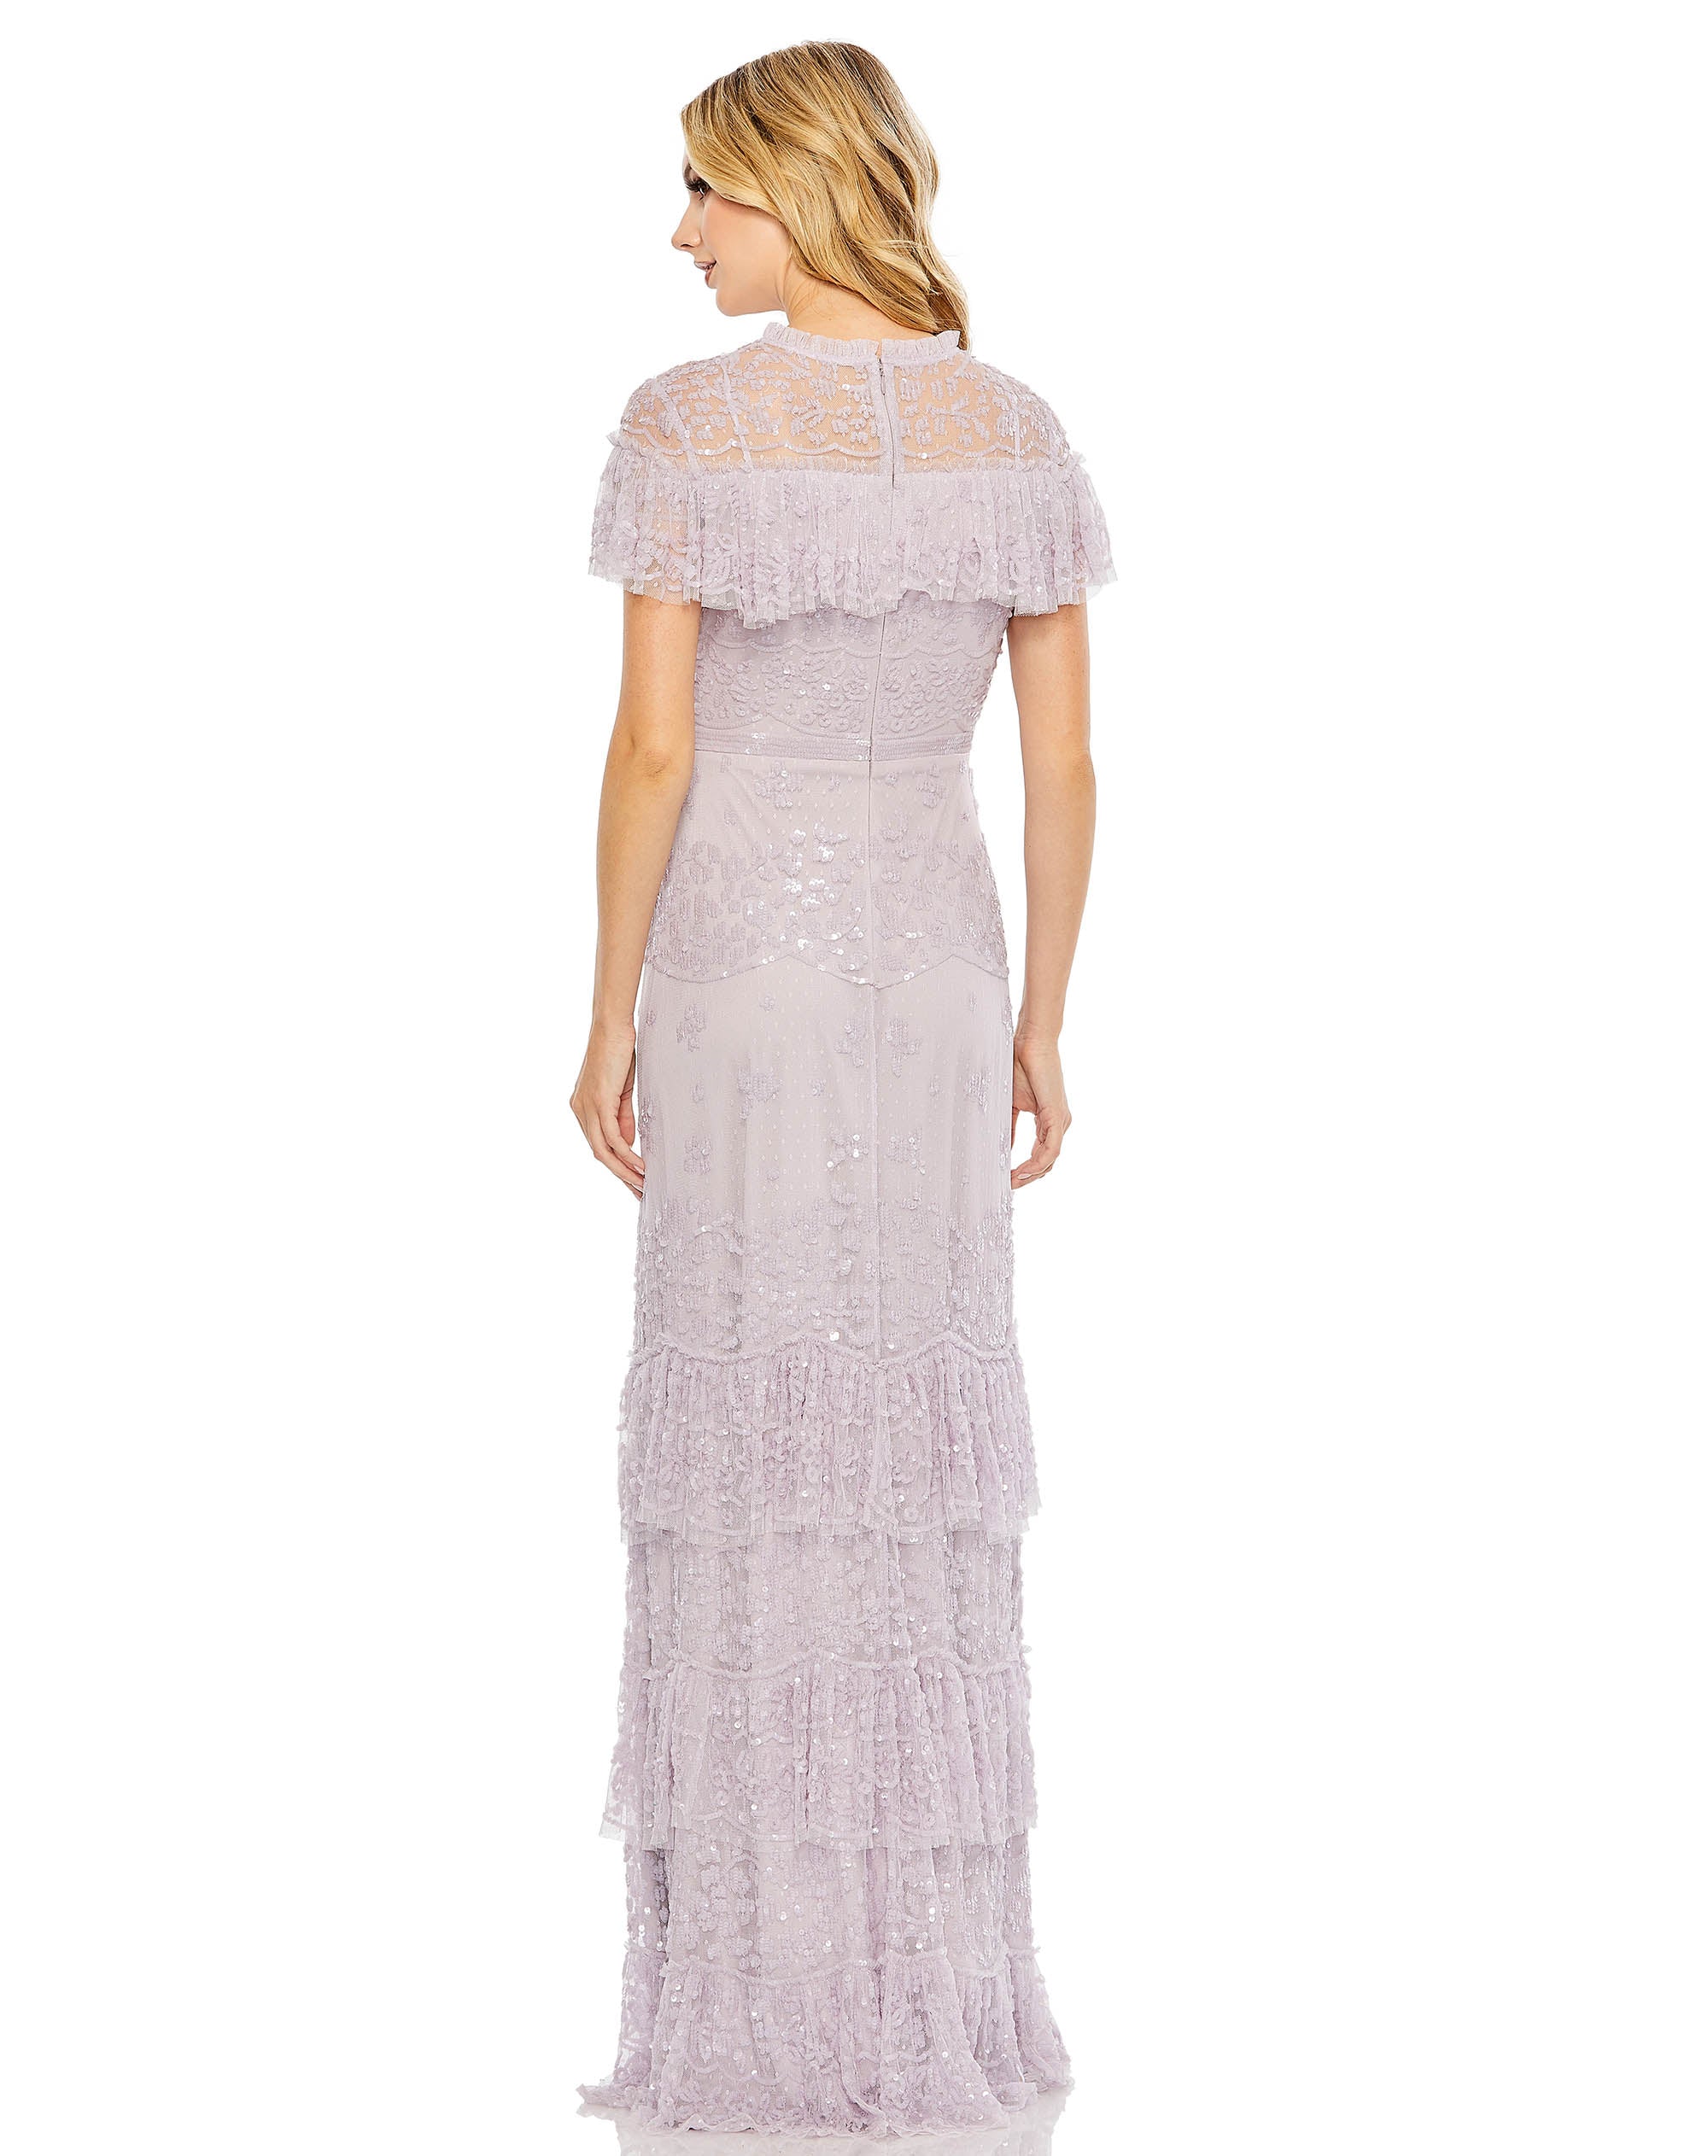 Embellished Cap Sleeve Ruffle Tiered Gown